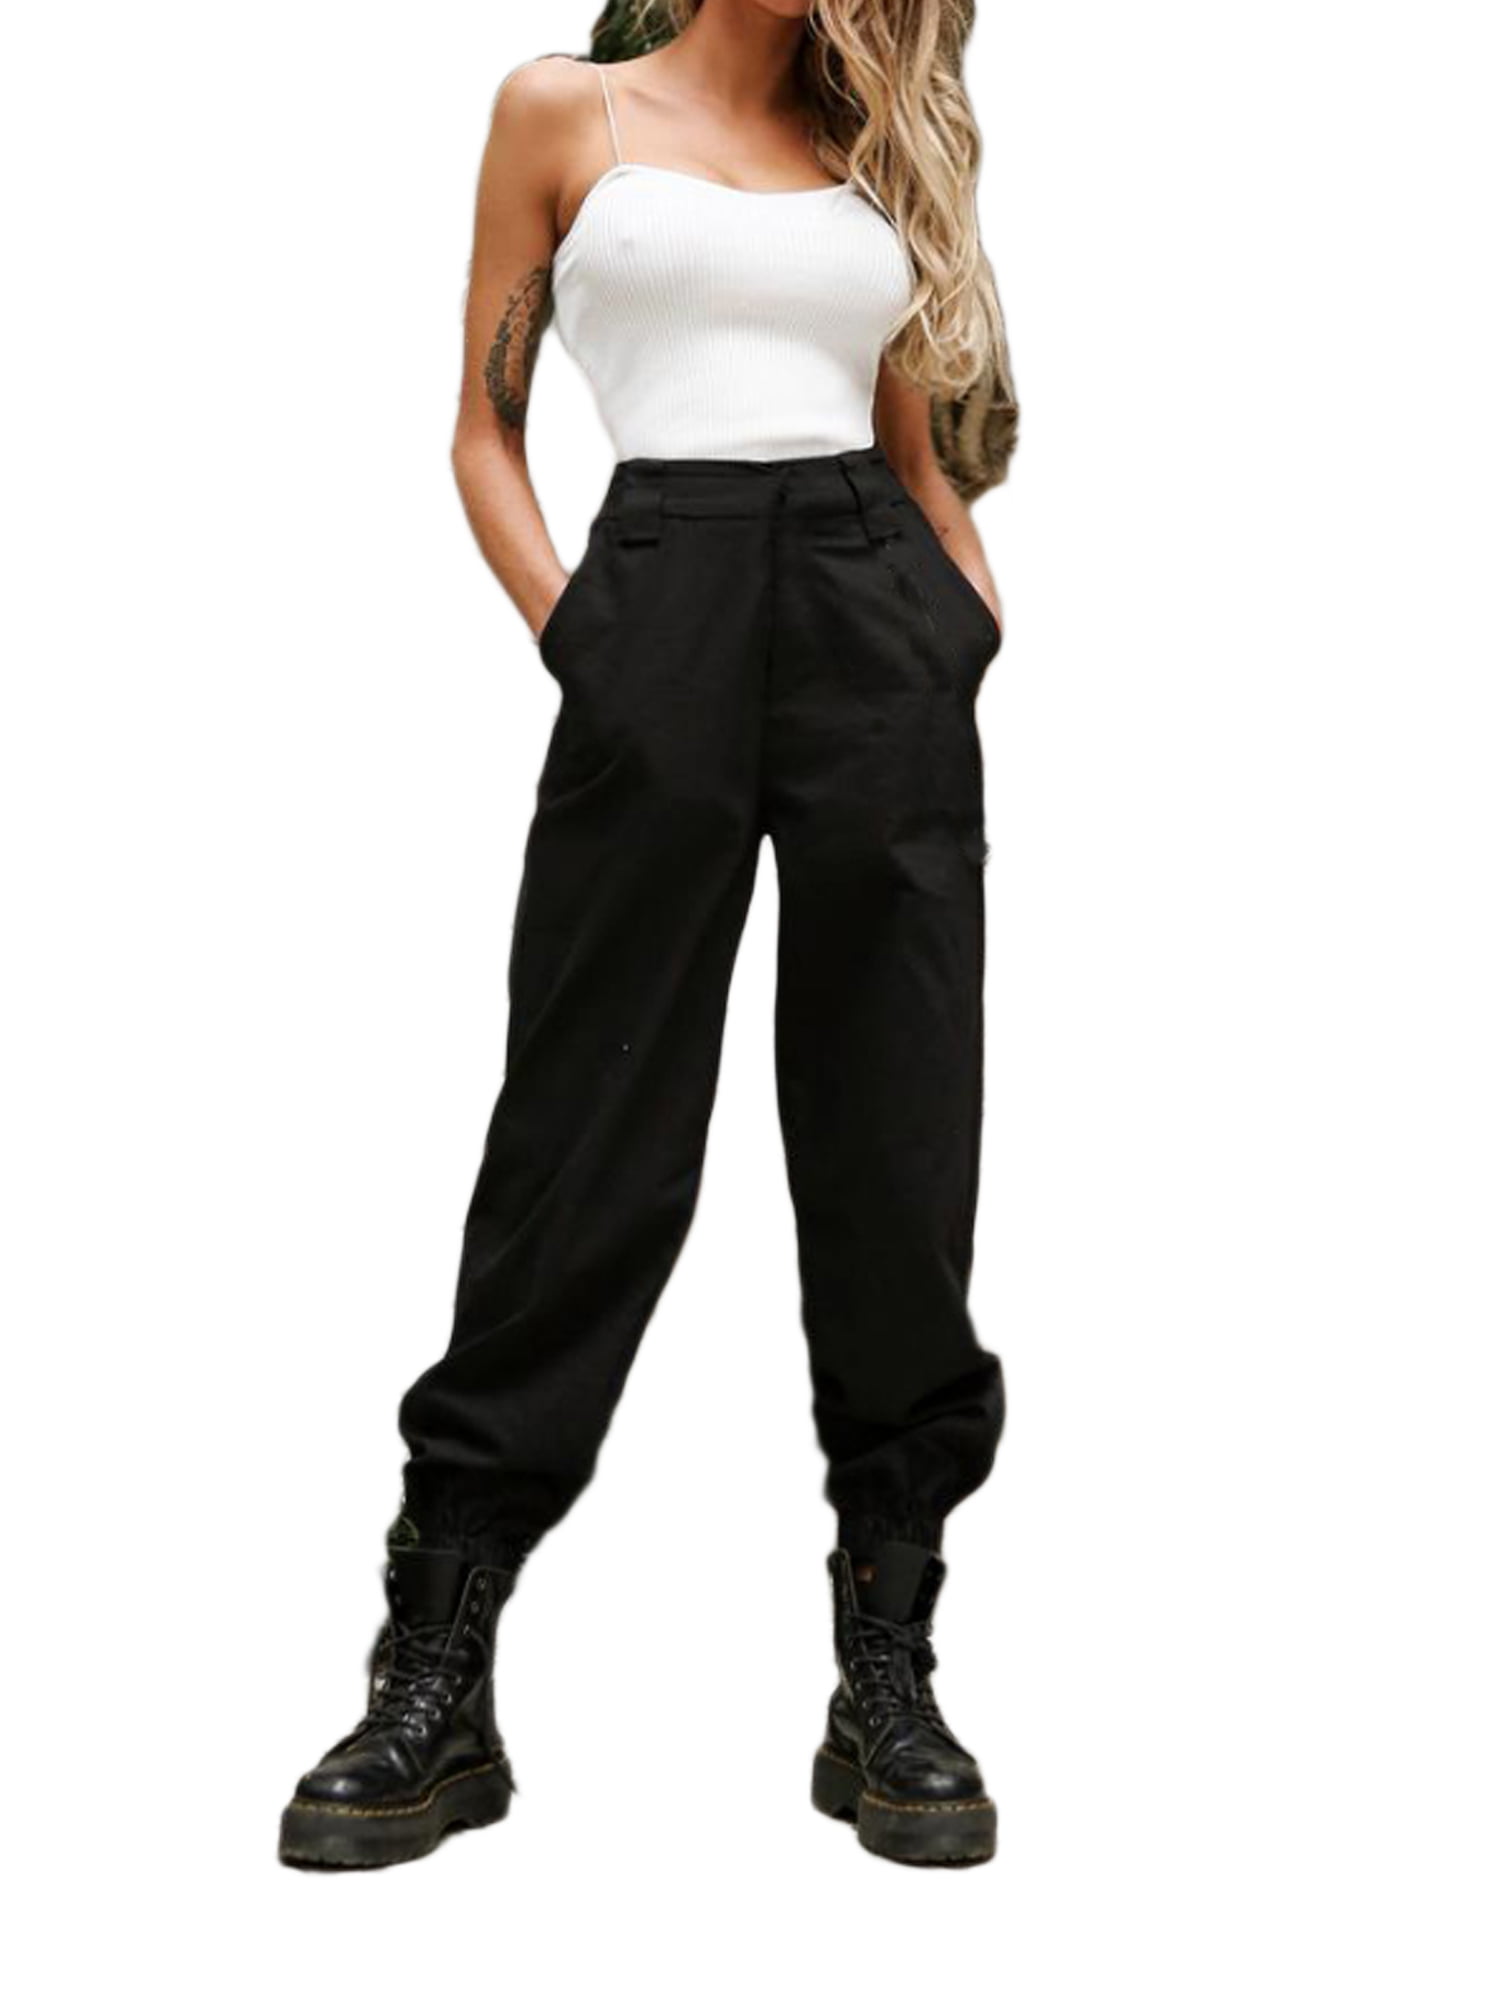 Top more than 69 ladies combat trousers best - in.cdgdbentre